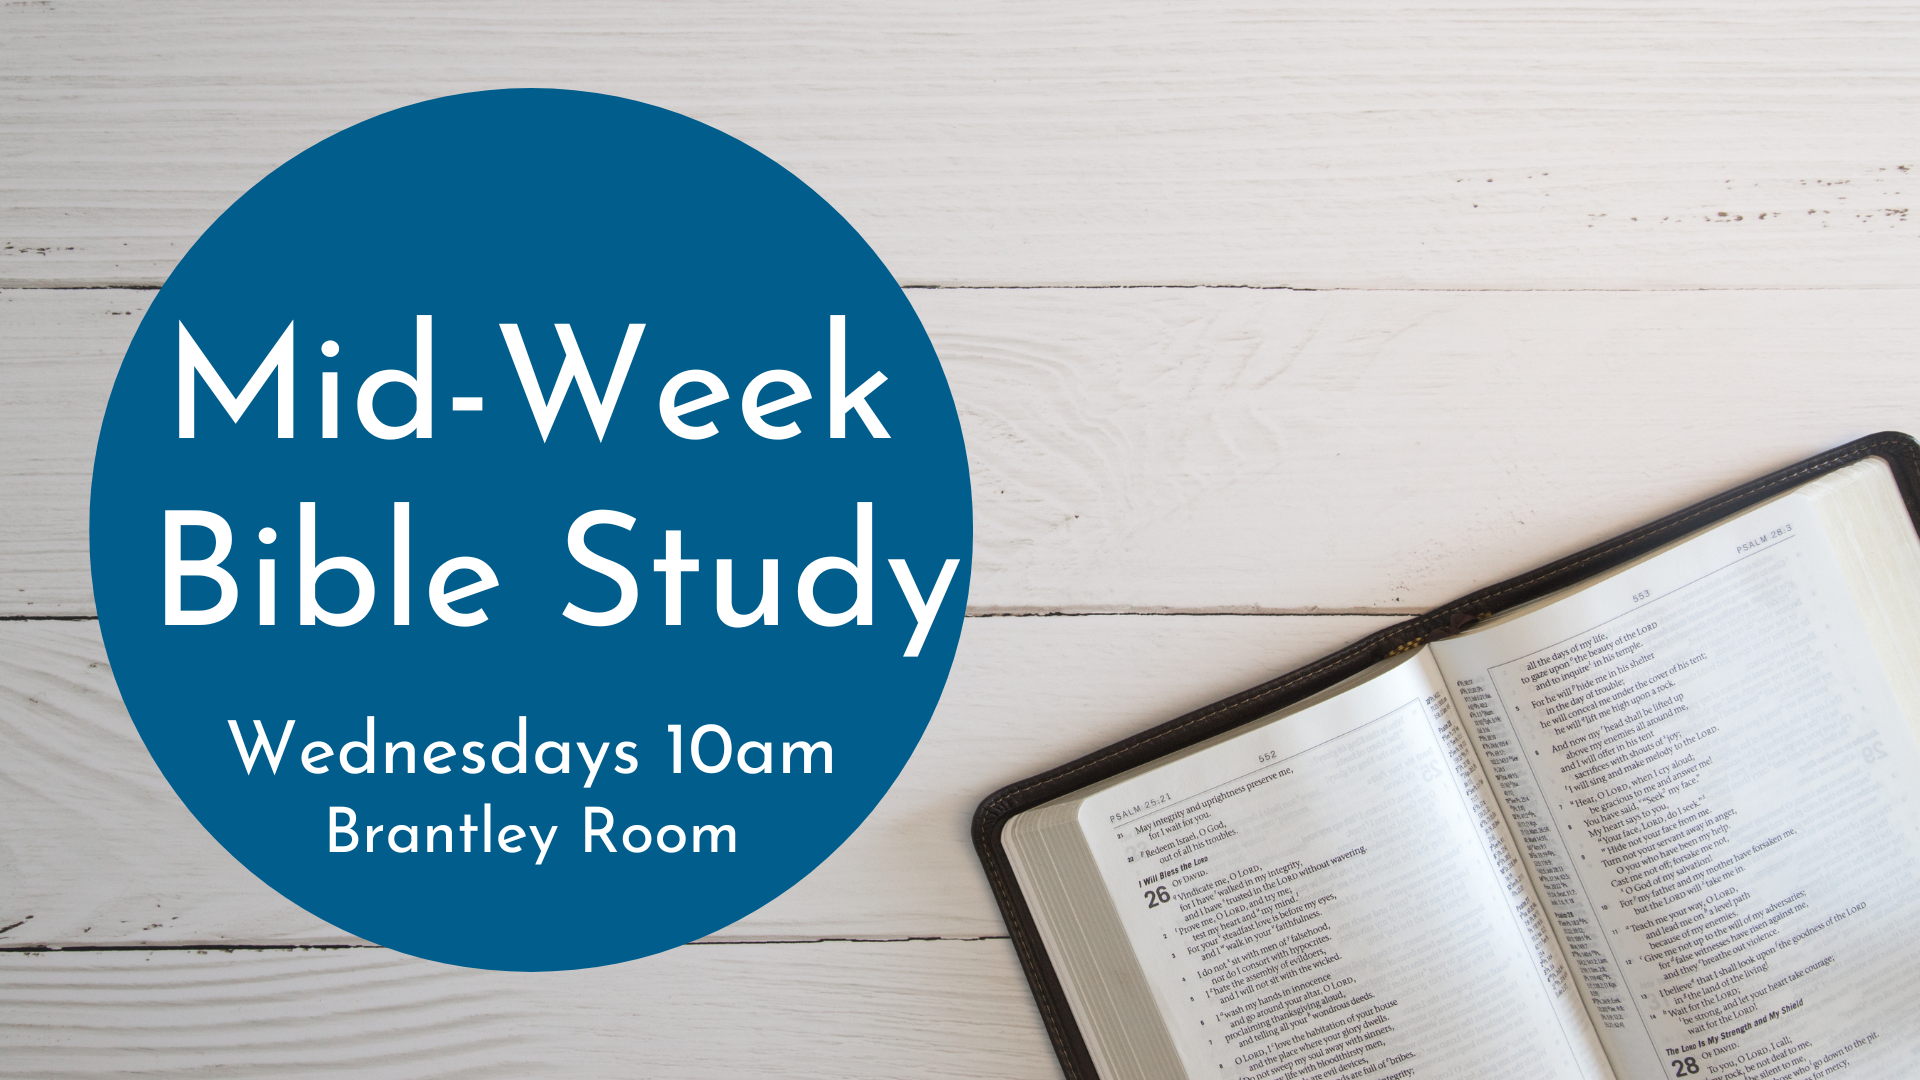 There will be NO Mid-Week Bible Study This Wednesday morning. image